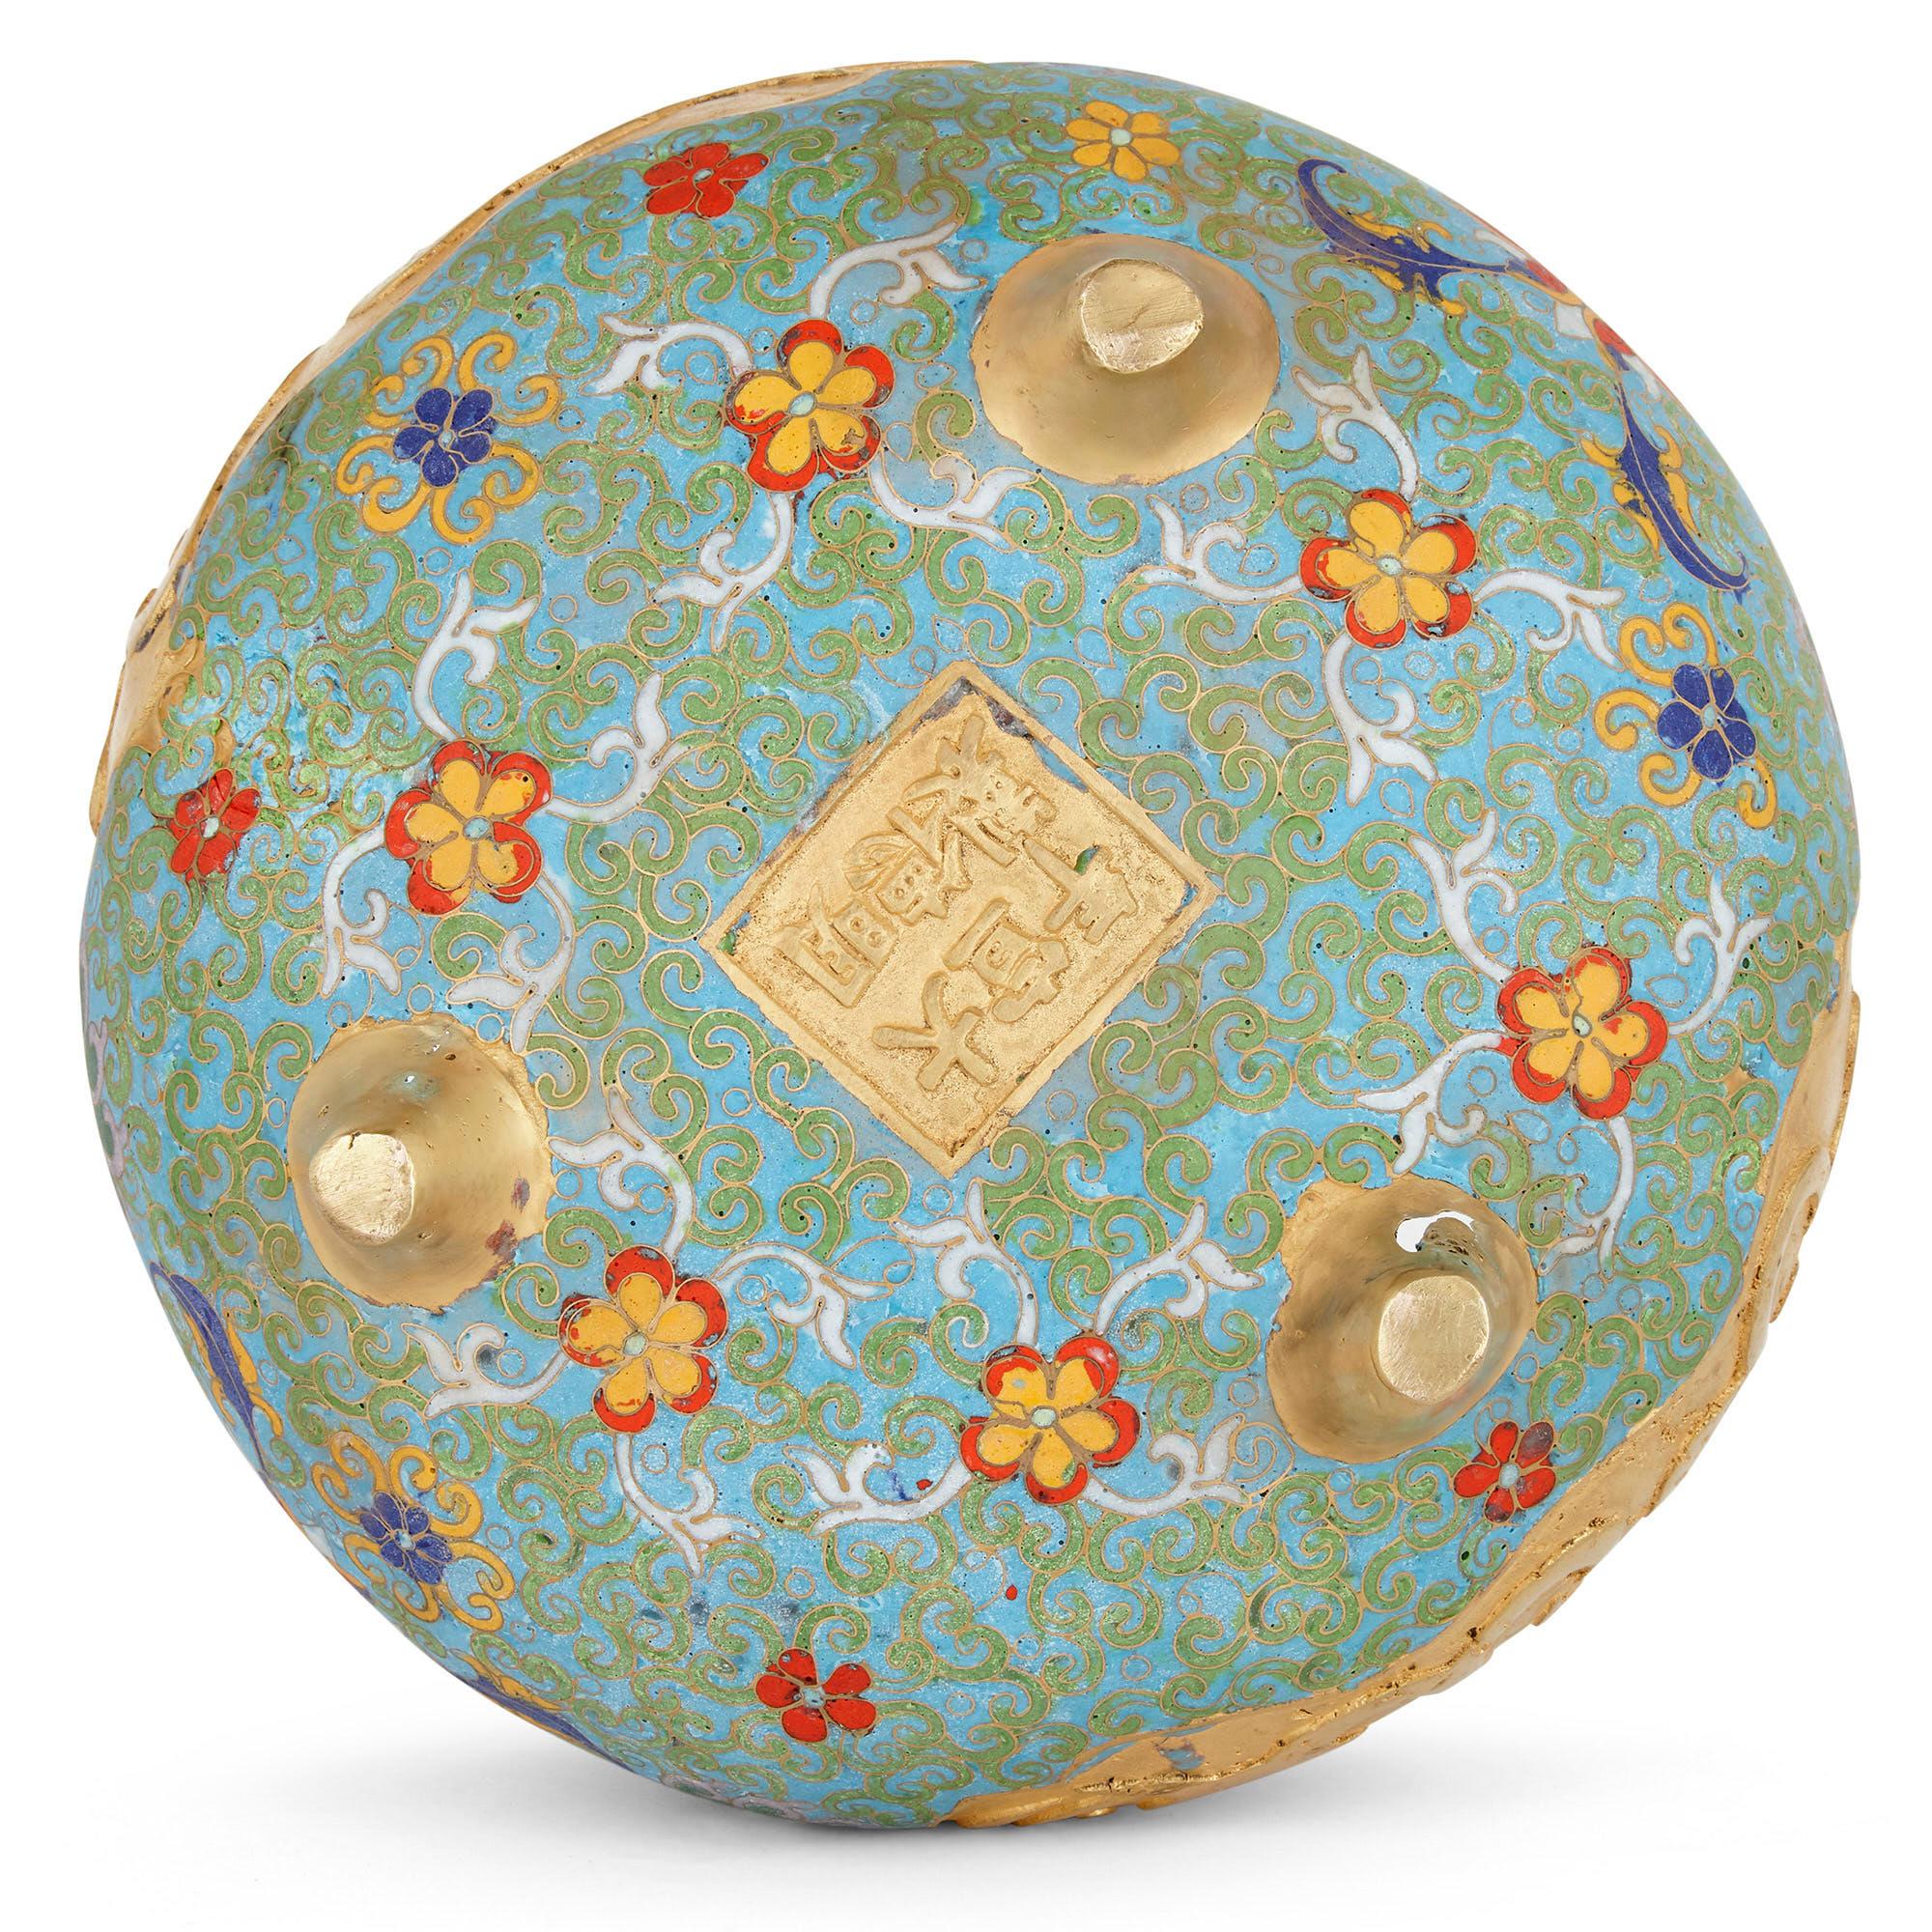 20th Century Chinese Floral Cloisonné Enamel and Ormolu Vase for Islamic Market For Sale